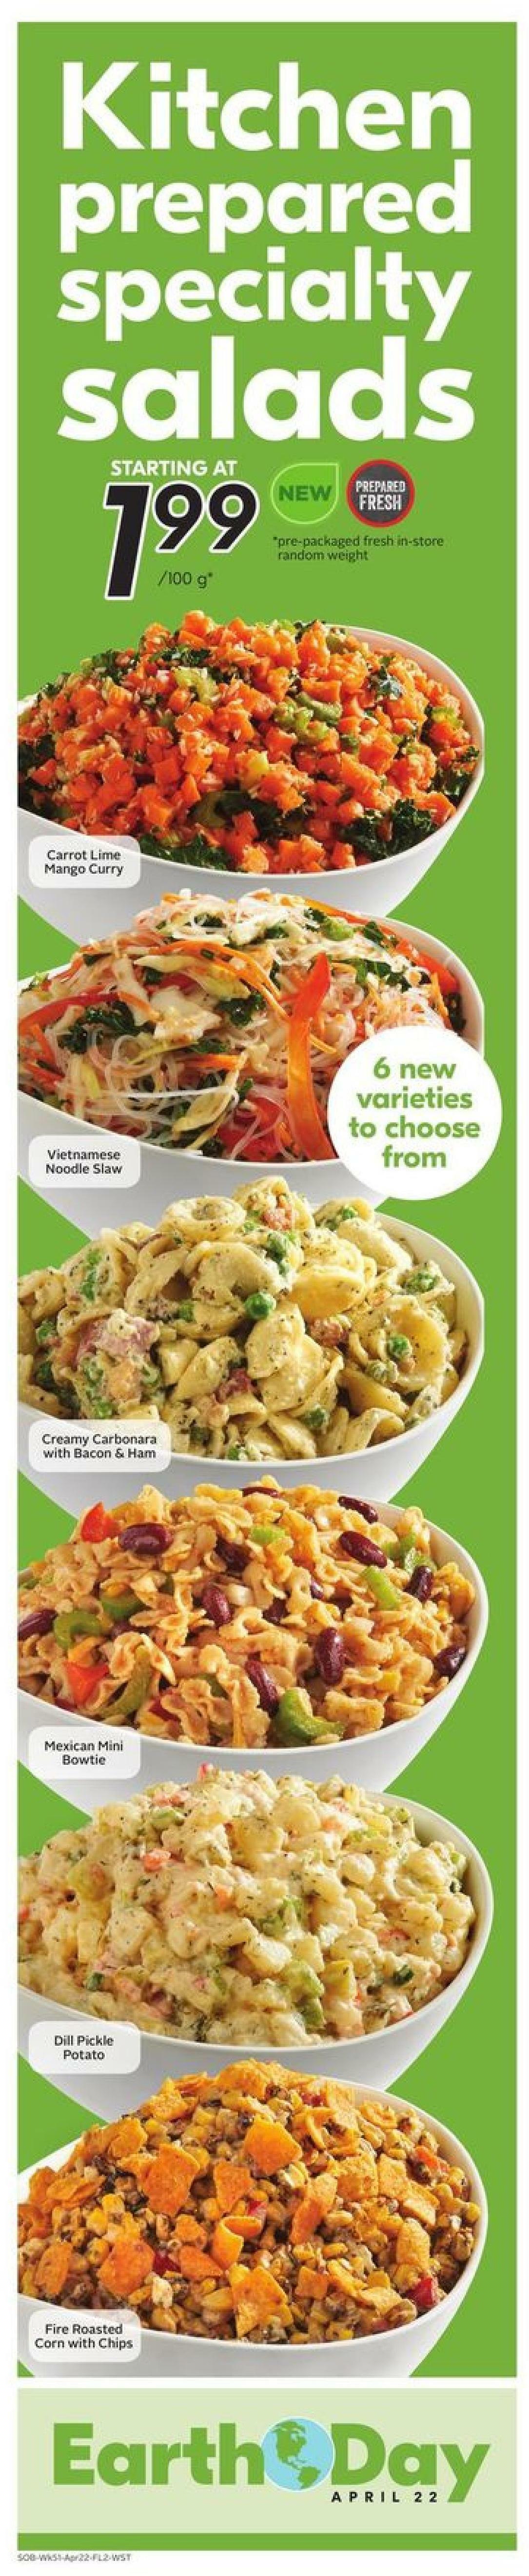 Safeway Flyer from April 16